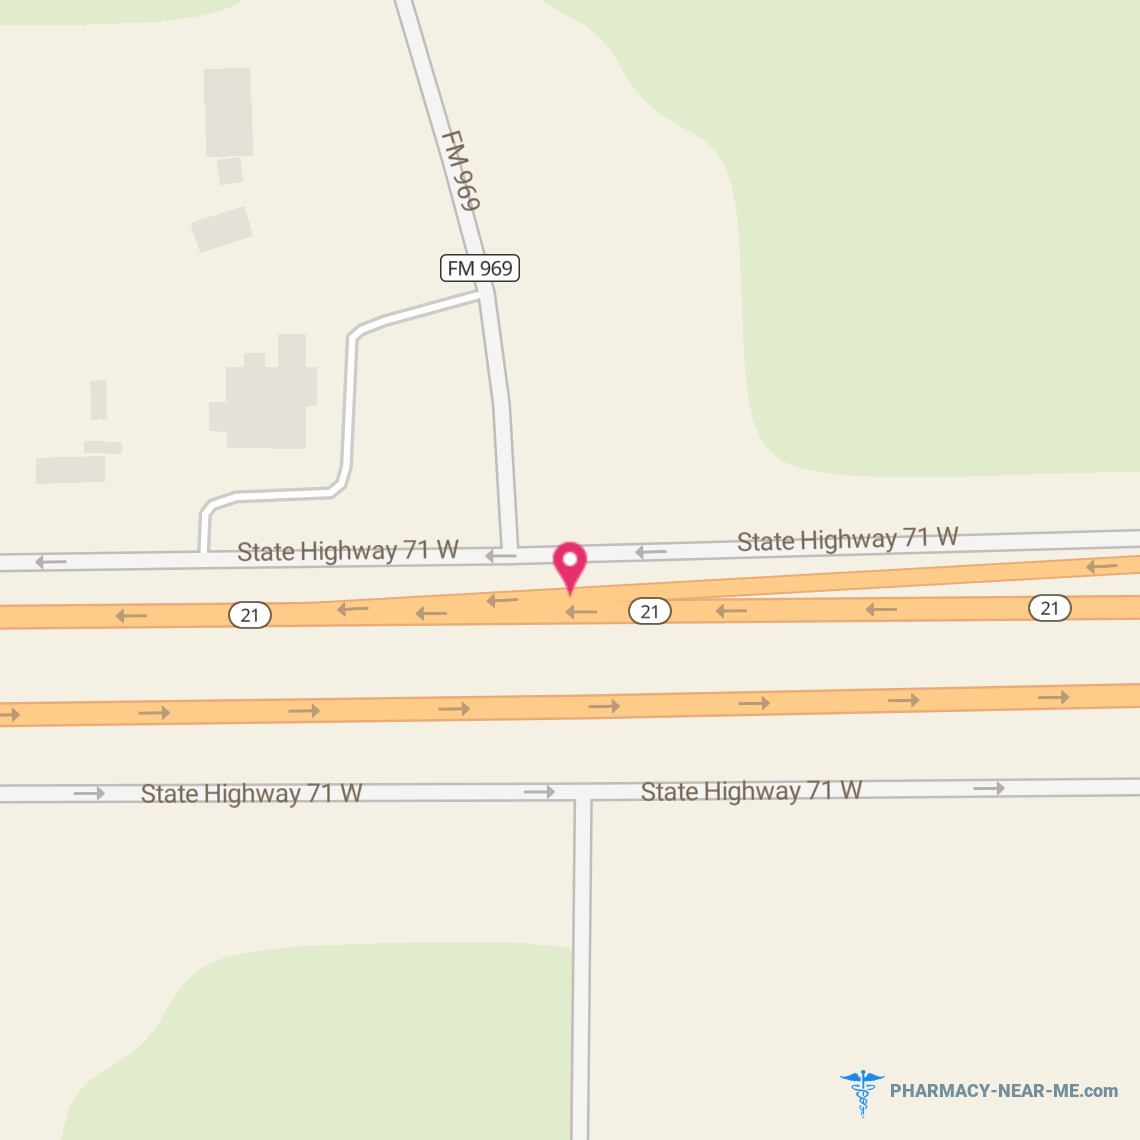 WALGREENS #09143 - Pharmacy Hours, Phone, Reviews & Information: 504 Highway 71 West, Bastrop, Texas 78602, United States